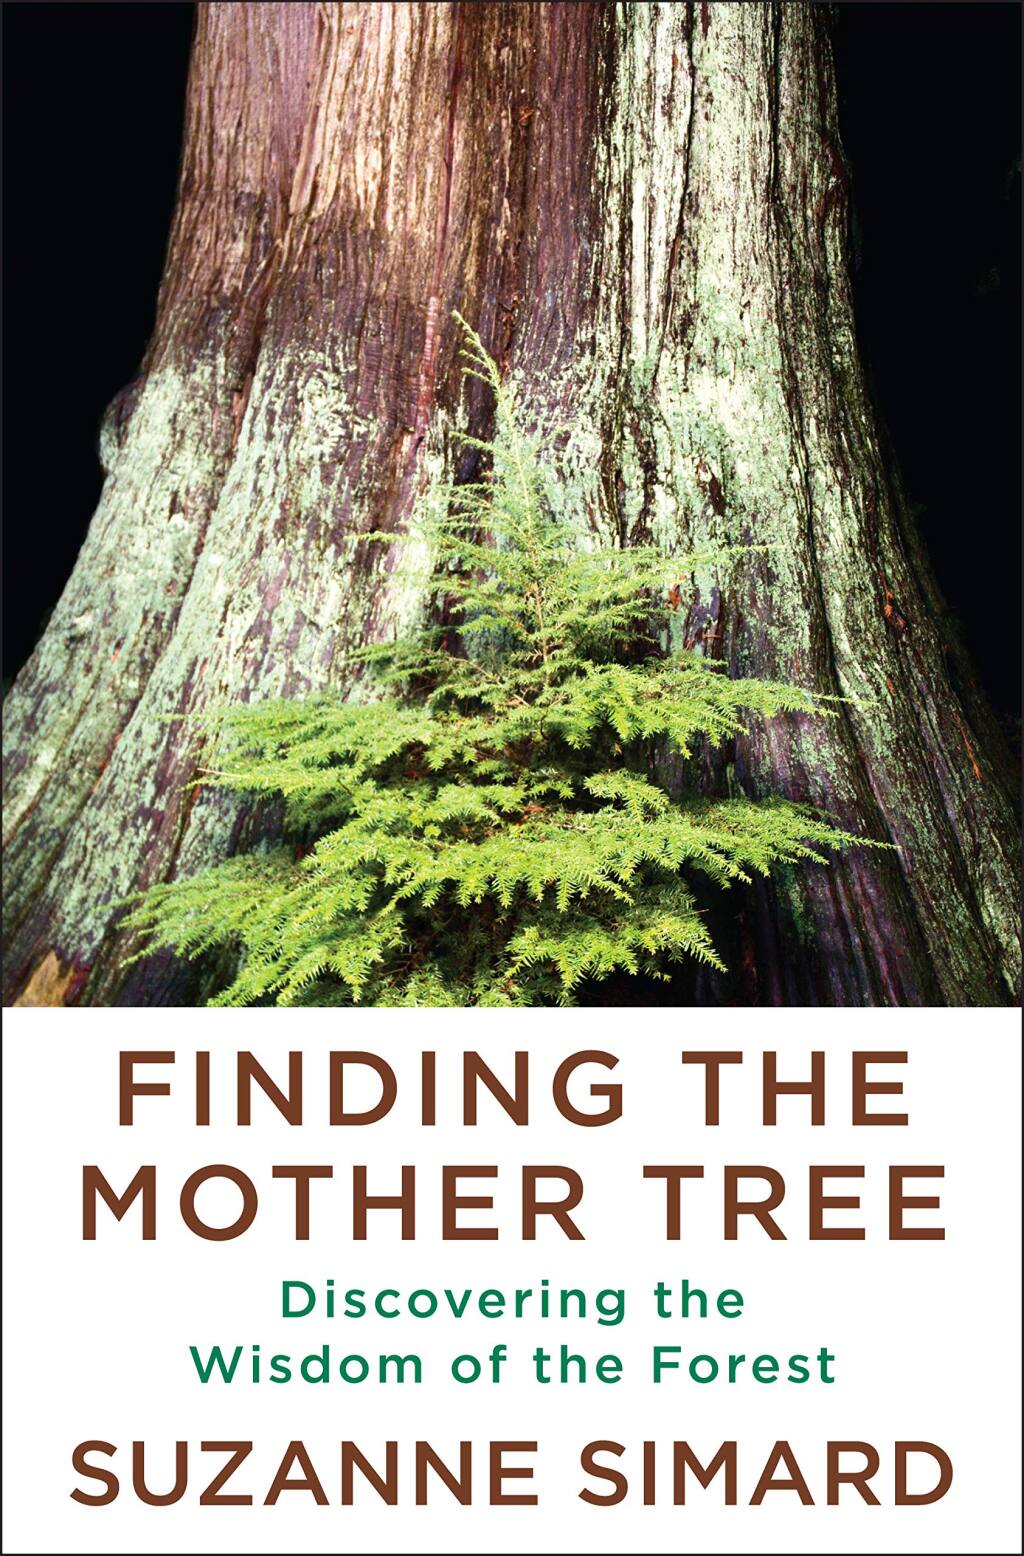 “Finding the Mother Tree,” by Suzanne Simard, is the No. 4 bestselling book in Petaluma this week (KNOPF BOOKS).